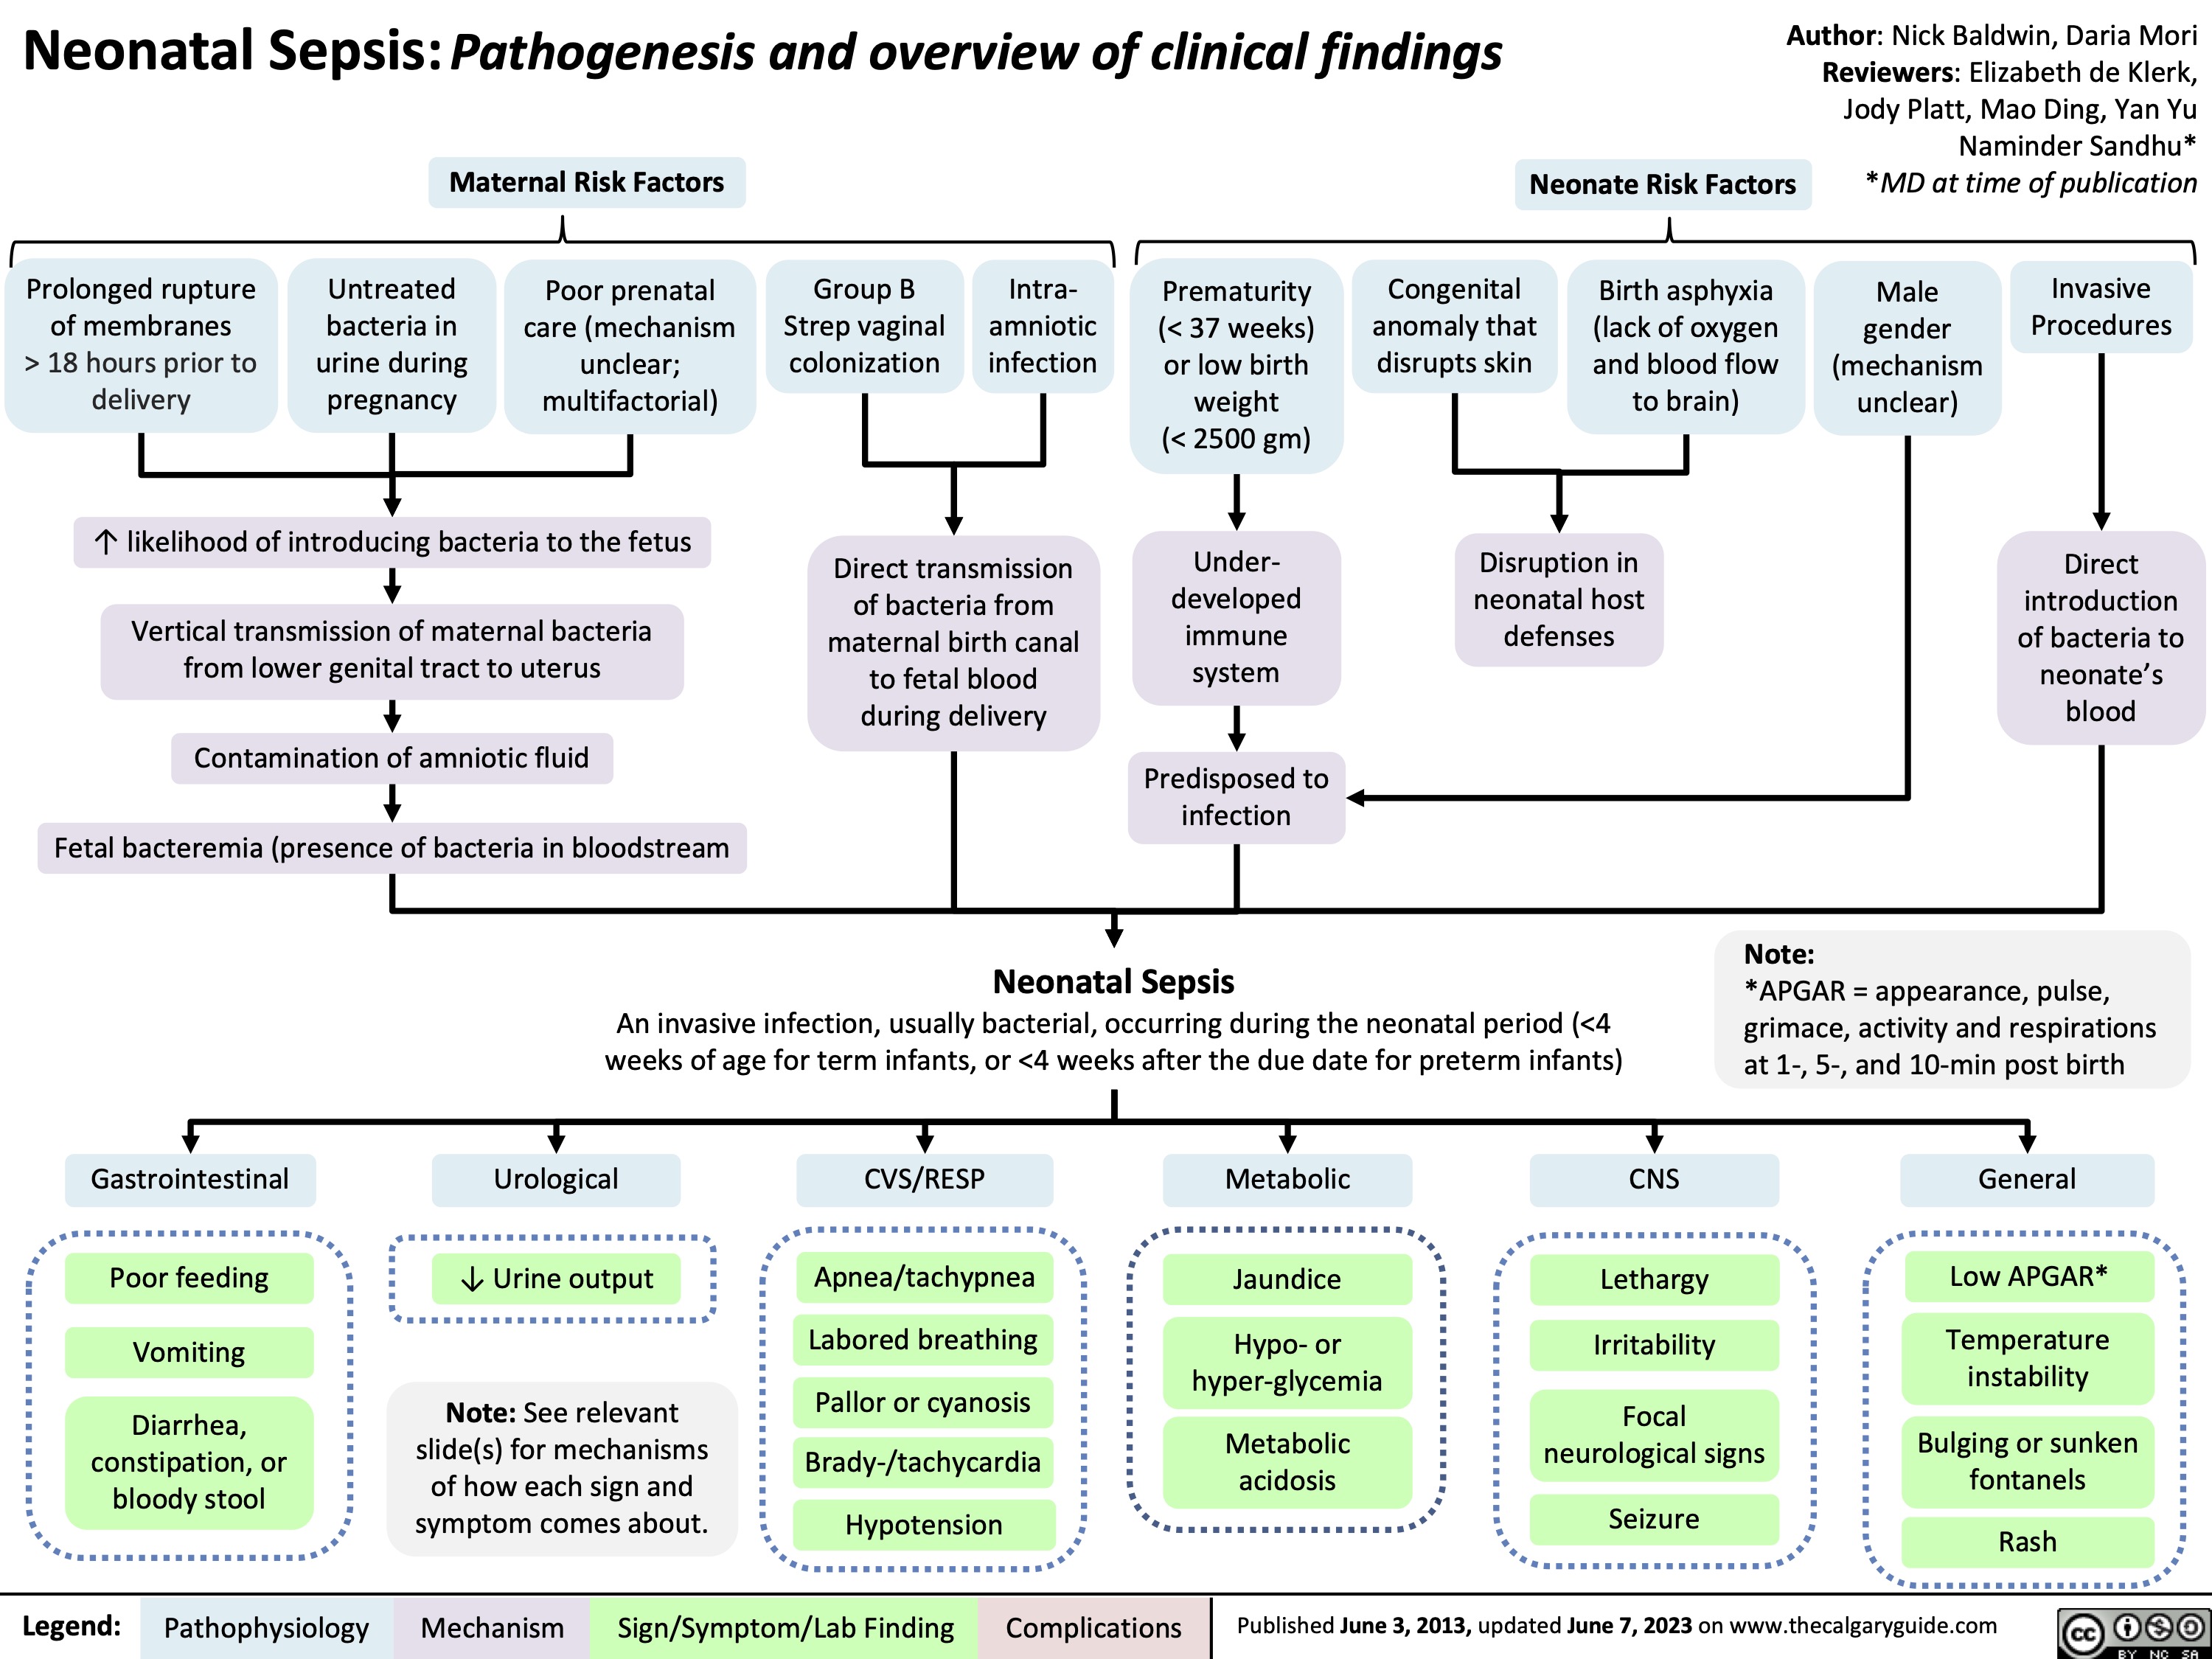 Neonatal Sepsis: Pathogenesis and overview of clinical findings Maternal Risk Factors
Author: Nick Baldwin, Daria Mori Reviewers: Elizabeth de Klerk, Jody Platt, Mao Ding, Yan Yu Naminder Sandhu* *MD at time of publication
  Neonate Risk Factors
            Prolonged rupture of membranes
> 18 hours prior to delivery
Untreated
bacteria in urine during pregnancy
Poor prenatal care (mechanism unclear; multifactorial)
Group B Strep vaginal colonization
Intra- amniotic infection
Prematurity (< 37 weeks) or low birth weight
(< 2500 gm)
Under- developed immune system
Predisposed to infection
Congenital anomaly that disrupts skin
Birth asphyxia (lack of oxygen and blood flow to brain)
Male gender (mechanism unclear)
Invasive Procedures
Direct introduction of bacteria to neonate’s blood
      ↑ likelihood of introducing bacteria to the fetus
Vertical transmission of maternal bacteria from lower genital tract to uterus
Contamination of amniotic fluid
Fetal bacteremia (presence of bacteria in bloodstream
Direct transmission of bacteria from maternal birth canal to fetal blood during delivery
Disruption in neonatal host defenses
              Neonatal Sepsis
An invasive infection, usually bacterial, occurring during the neonatal period (<4 weeks of age for term infants, or <4 weeks after the due date for preterm infants)
Note:
*APGAR = appearance, pulse, grimace, activity and respirations at 1-, 5-, and 10-min post birth
         Gastrointestinal
Poor feeding
Vomiting
Diarrhea, constipation, or bloody stool
Urological ↓ Urine output
Note: See relevant slide(s) for mechanisms of how each sign and symptom comes about.
CVS/RESP
Apnea/tachypnea Labored breathing Pallor or cyanosis Brady-/tachycardia Hypotension
Metabolic
Jaundice
Hypo- or hyper-glycemia
Metabolic acidosis
CNS
Lethargy Irritability
Focal neurological signs
Seizure
General
Low APGAR*
Temperature instability
Bulging or sunken fontanels
                Rash
 Legend:
 Pathophysiology
 Mechanism
Sign/Symptom/Lab Finding
 Complications
 Published June 3, 2013, updated June 7, 2023 on www.thecalgaryguide.com
  